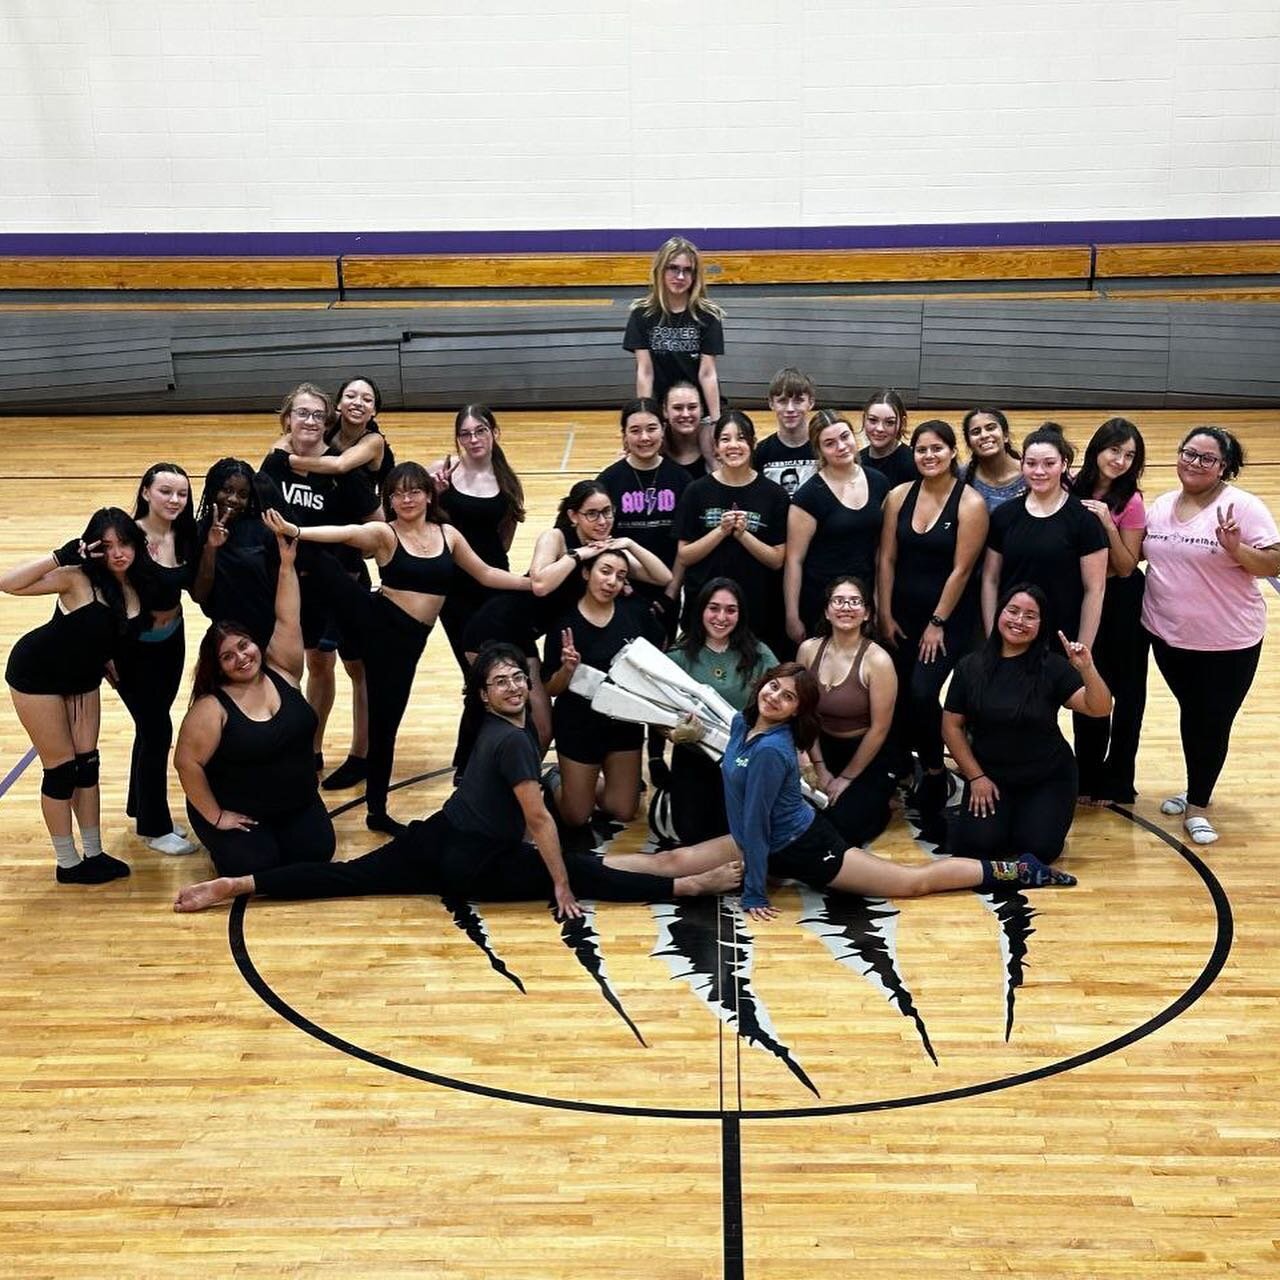 Always so happy to make new friends! 🥰

Huge thank you to Mesa Ridge Guard for hosting our rehearsal. They were so kind and supportive. They even donated rifles! So amazing! Not to mention we watched their run-through and they are so talented! Can&r